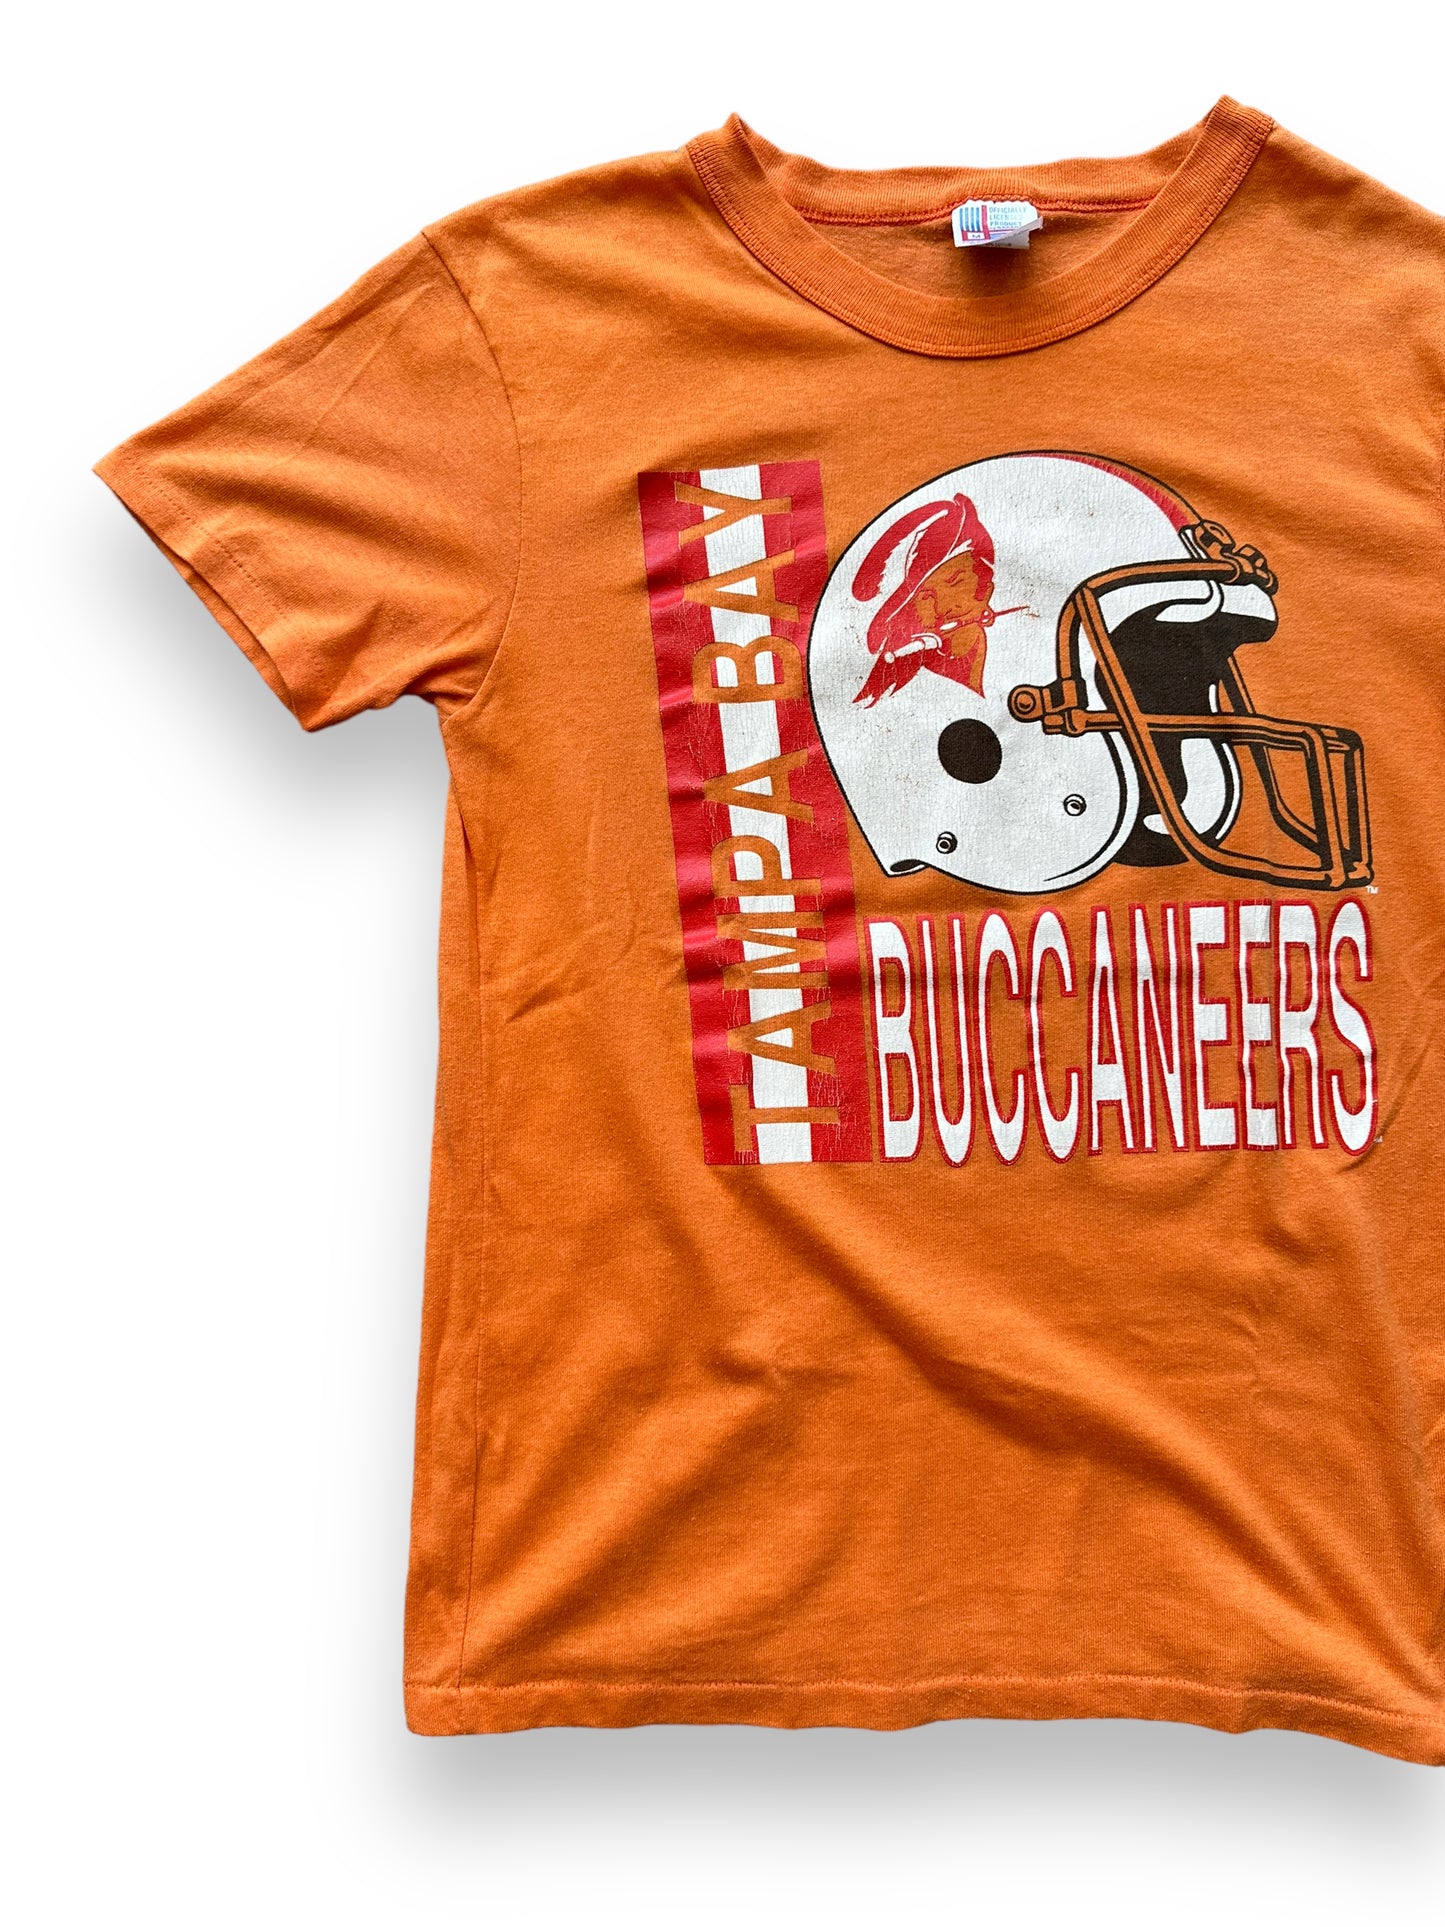 Front Right View of Vintage Tampa Bay Buccaneers Tee SZ M | Vintage Football T-Shirts Seattle | Barn Owl Vintage Tees Seattle